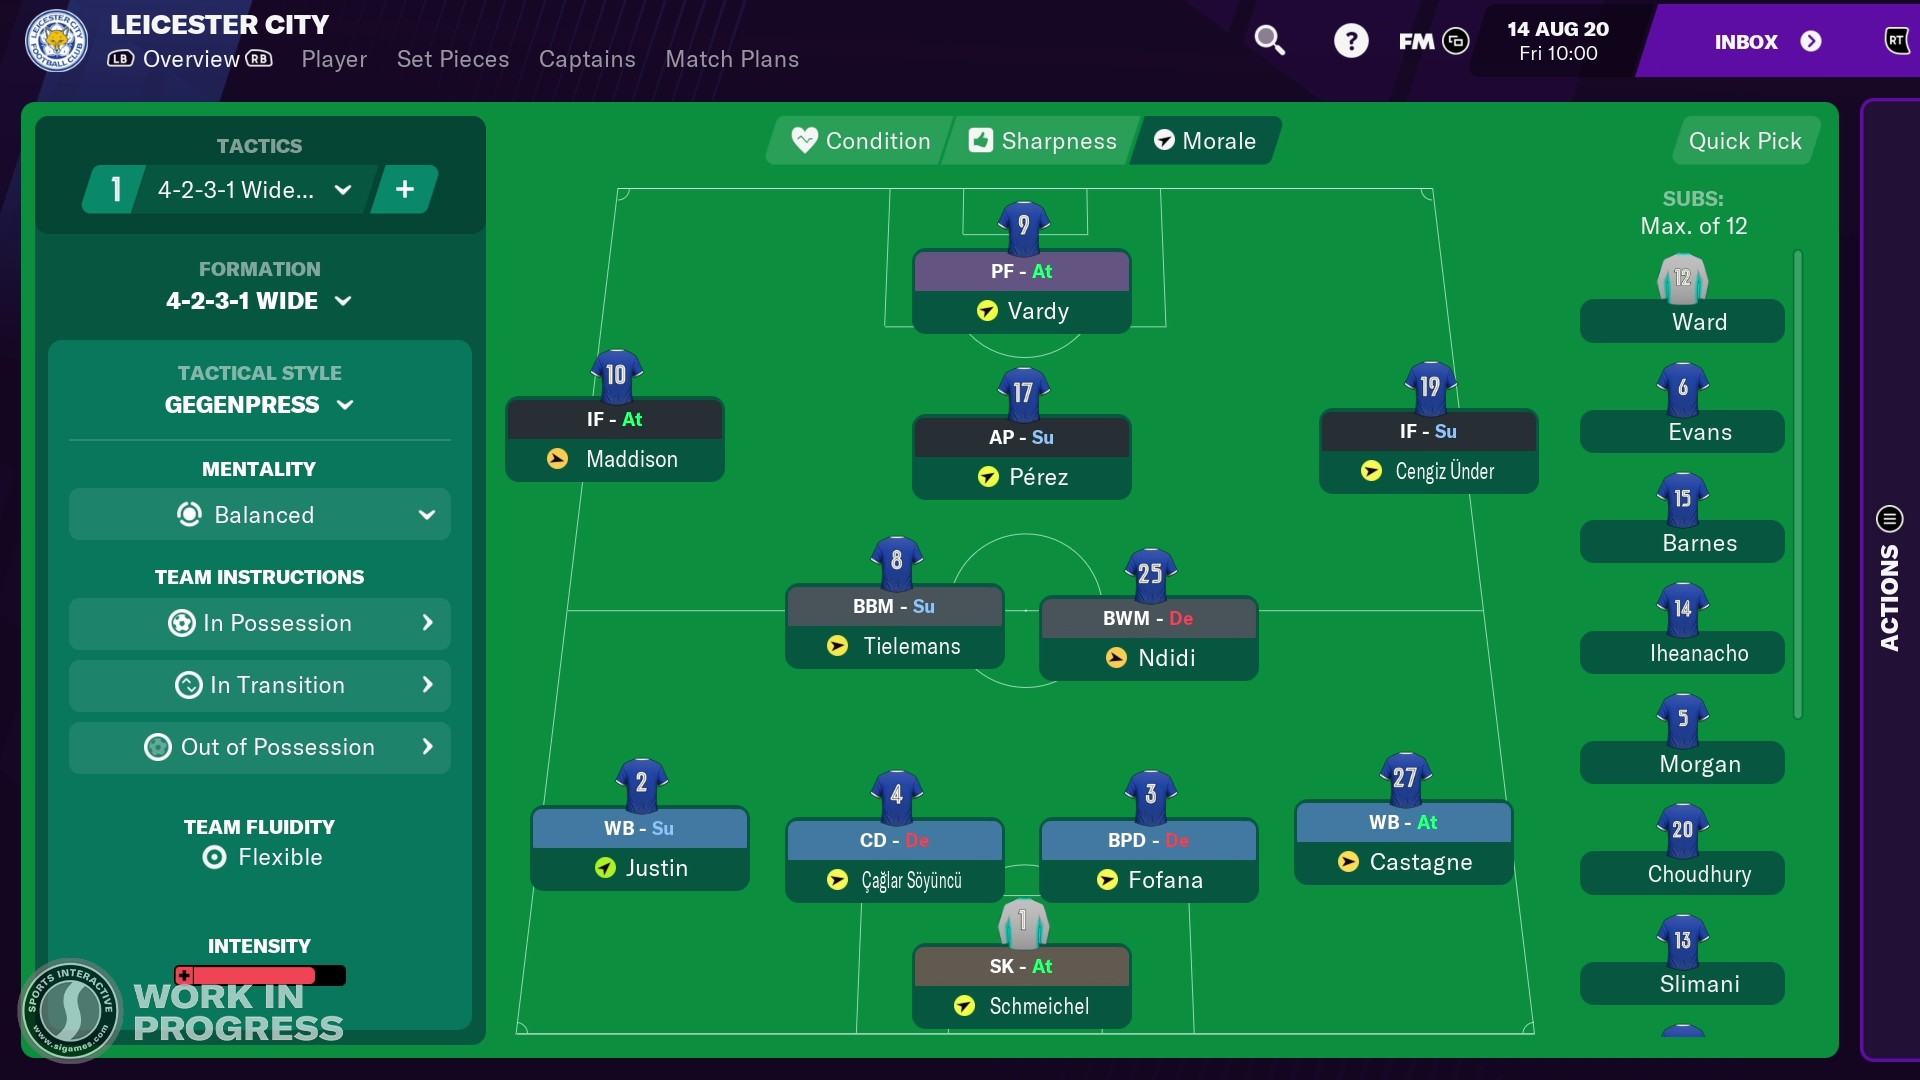 Football Manager 2021: Xbox Edition